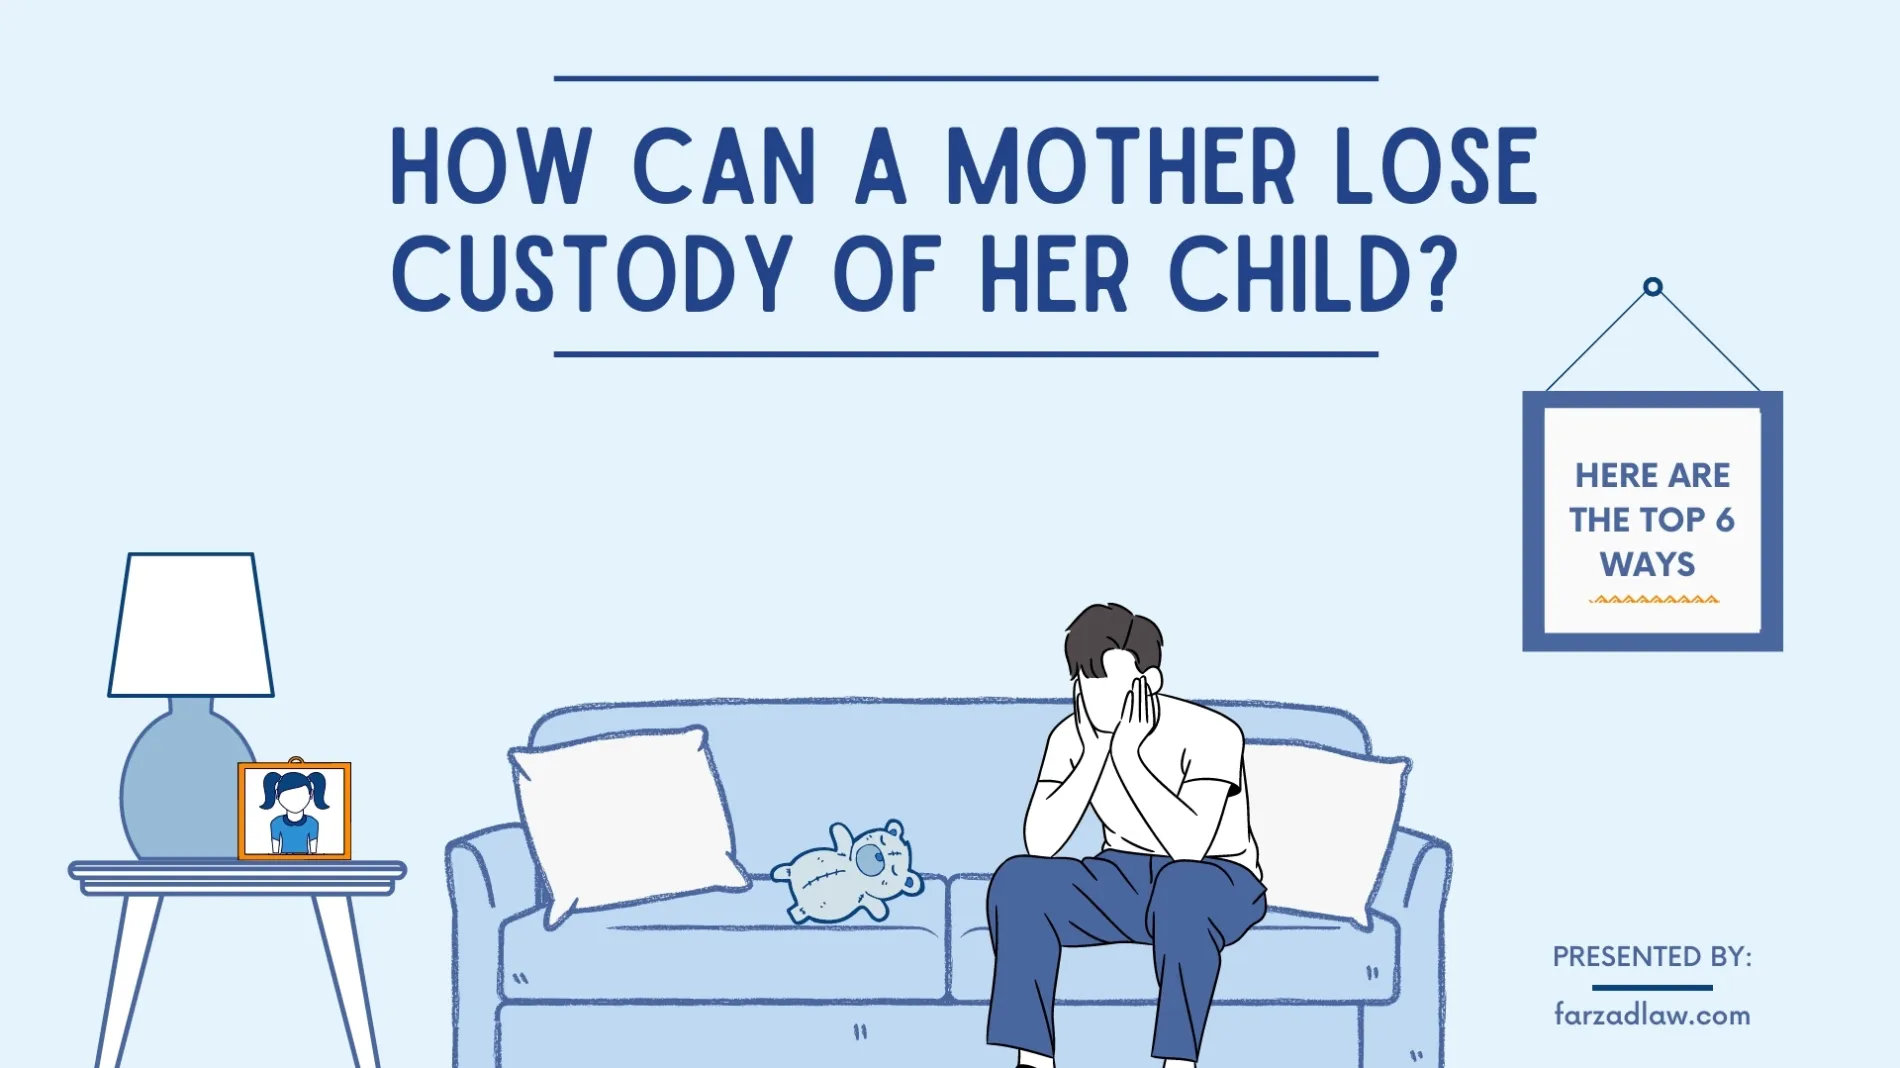 6 Ways On How A Mother Can Lose A Custody Battle Mother Losing